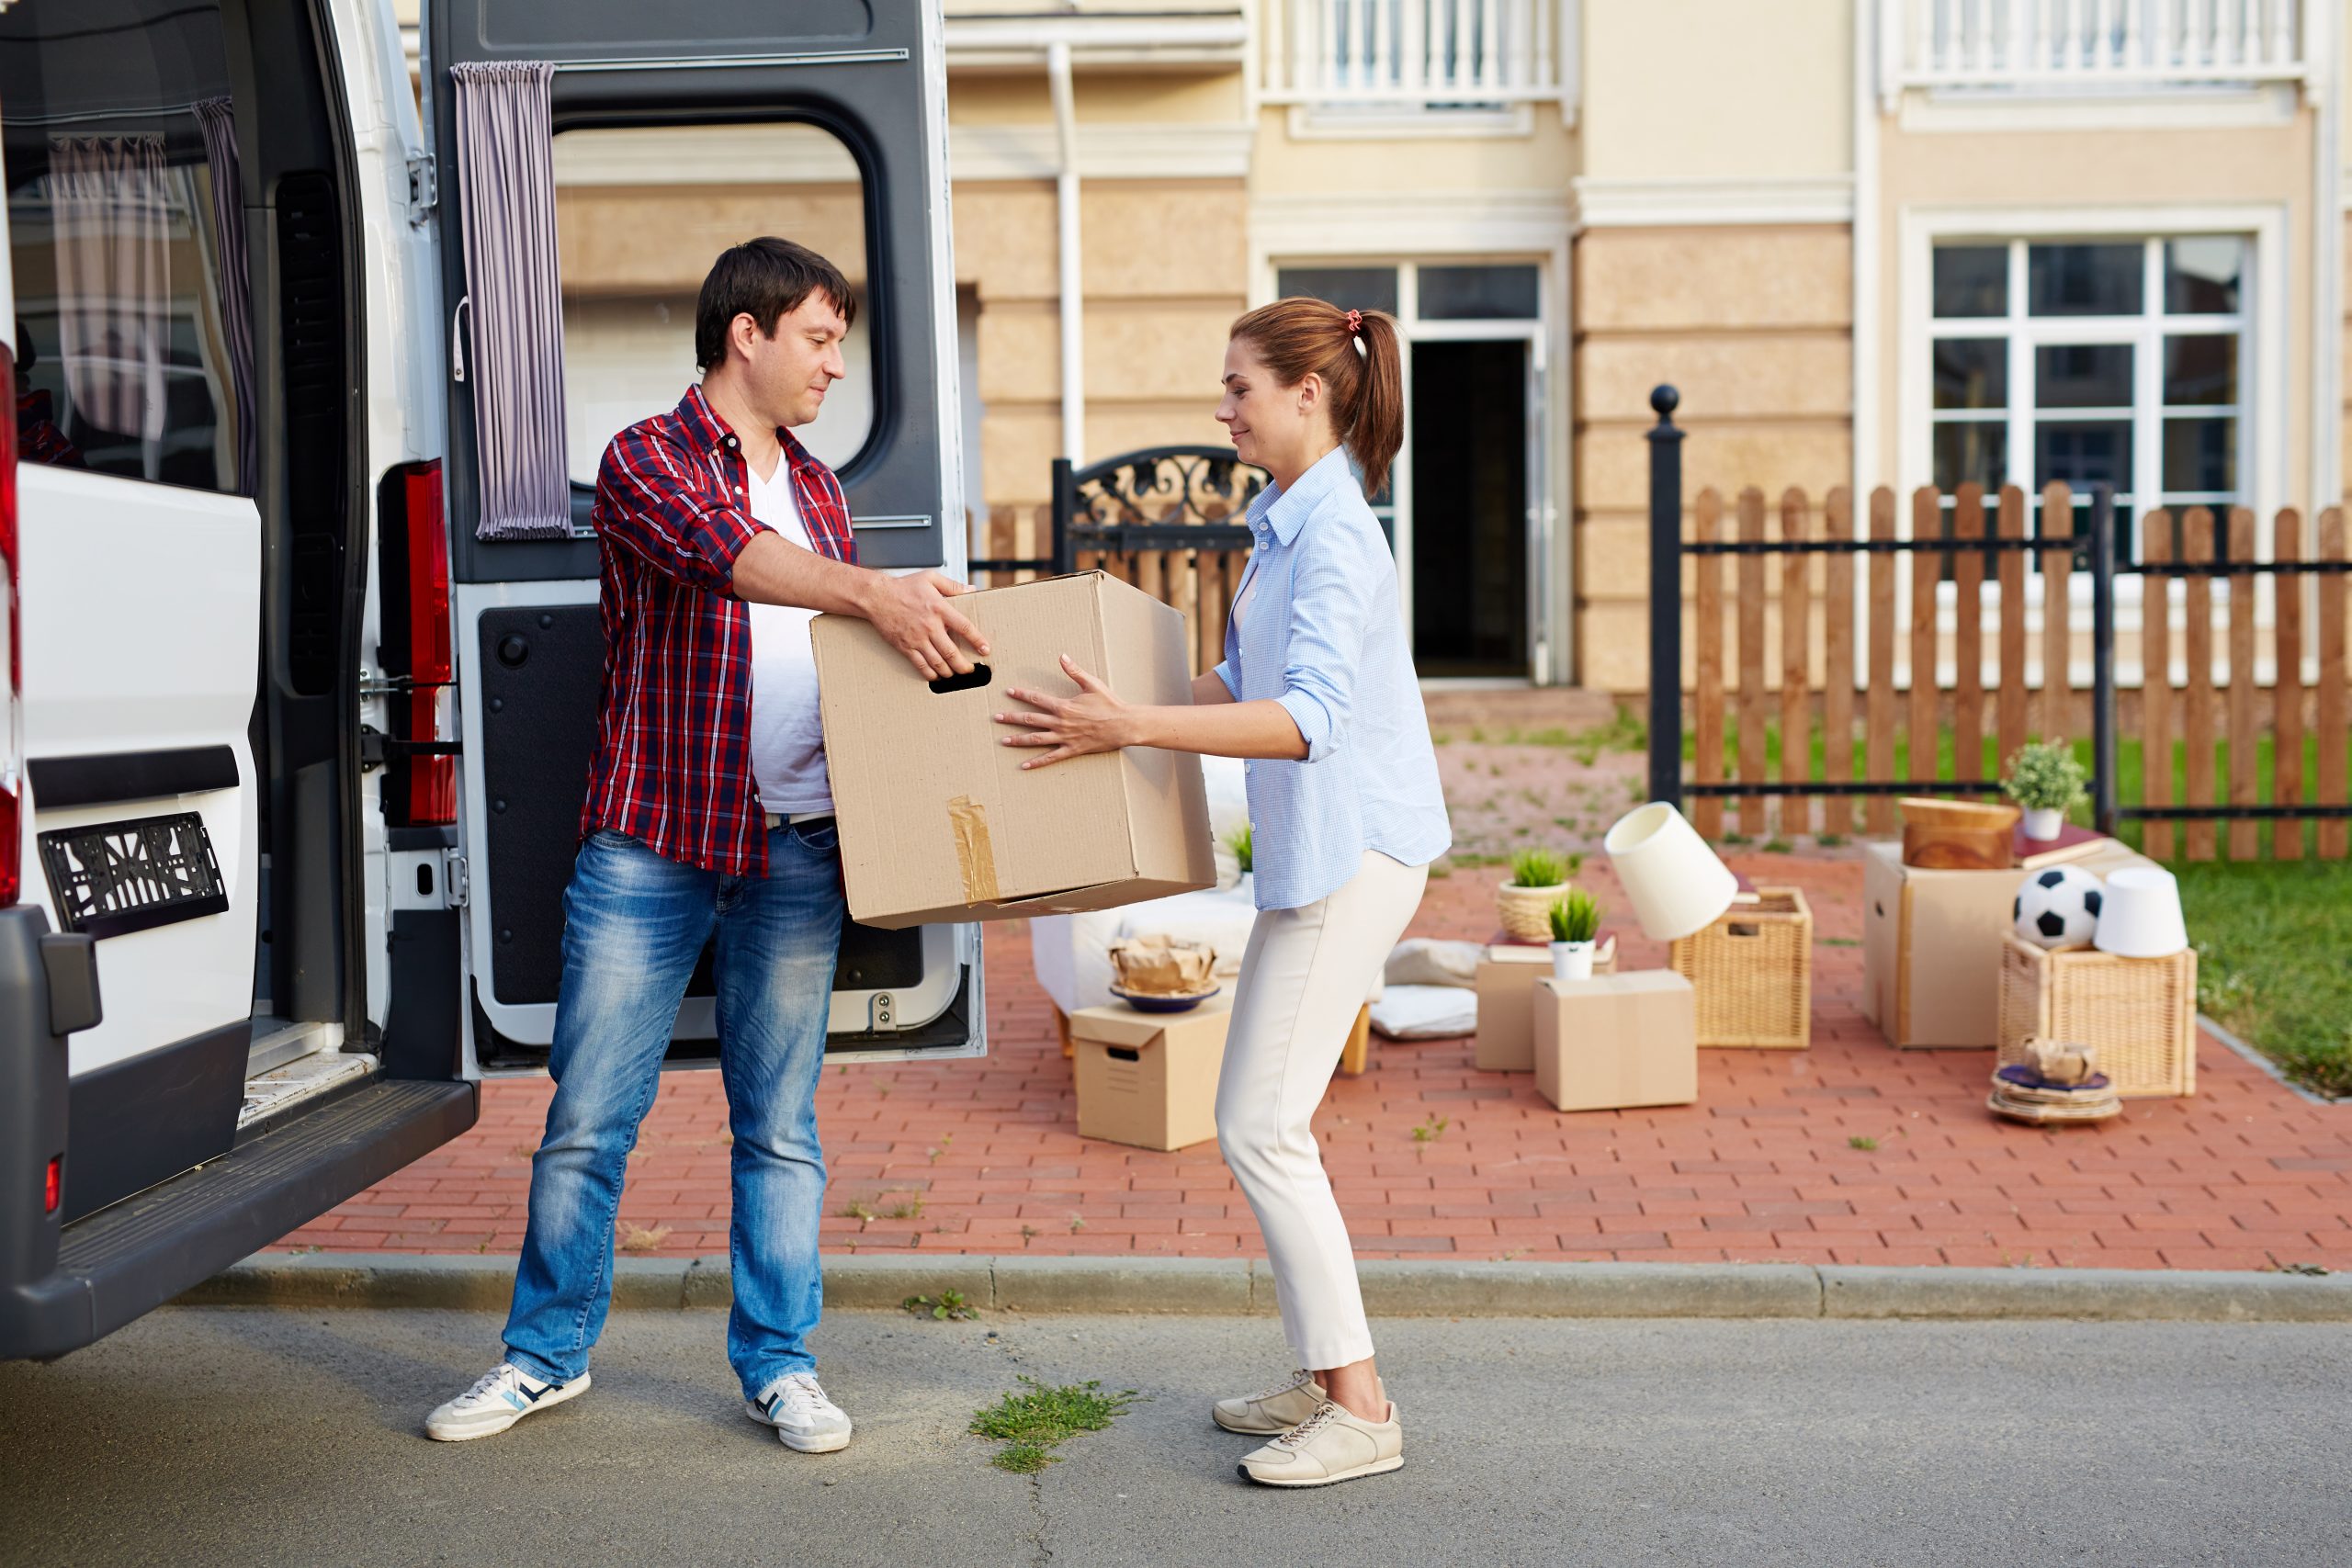 5 Common FAQs About Moving to the U.S.